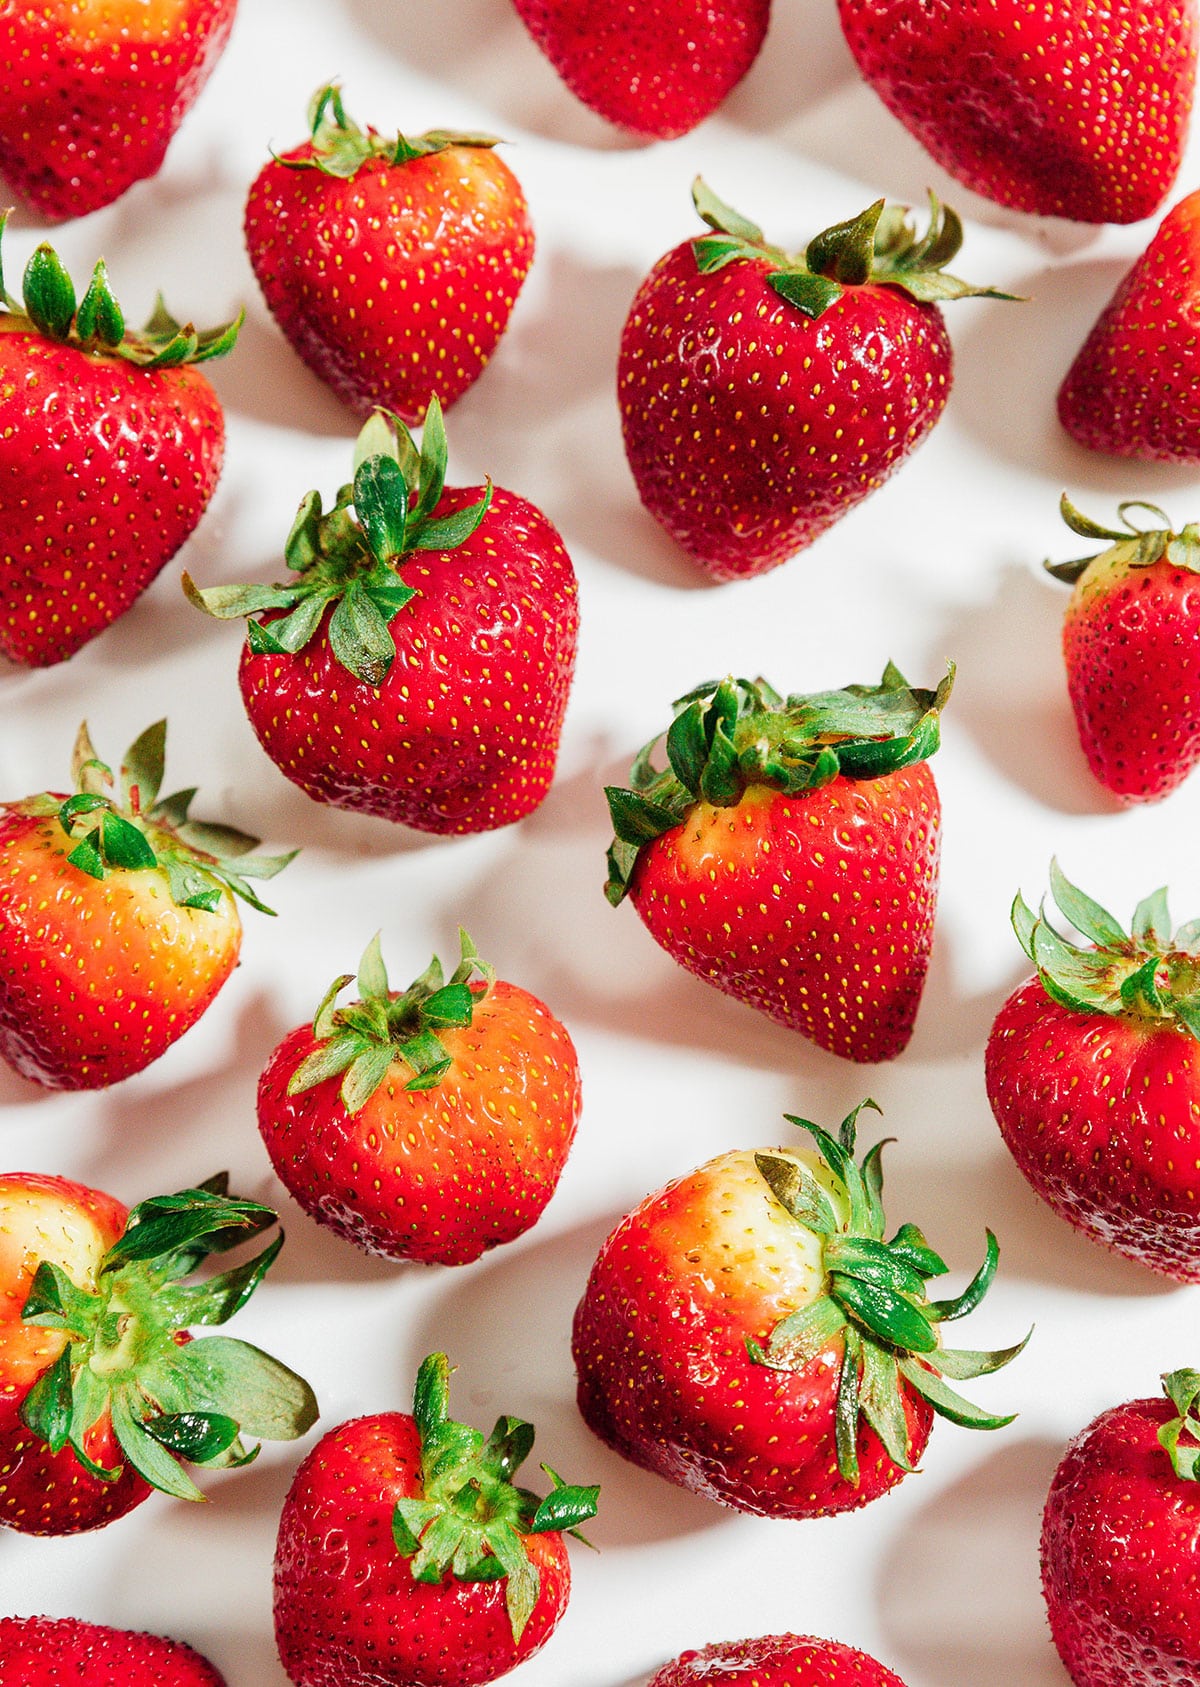 Strawberries on a white background.